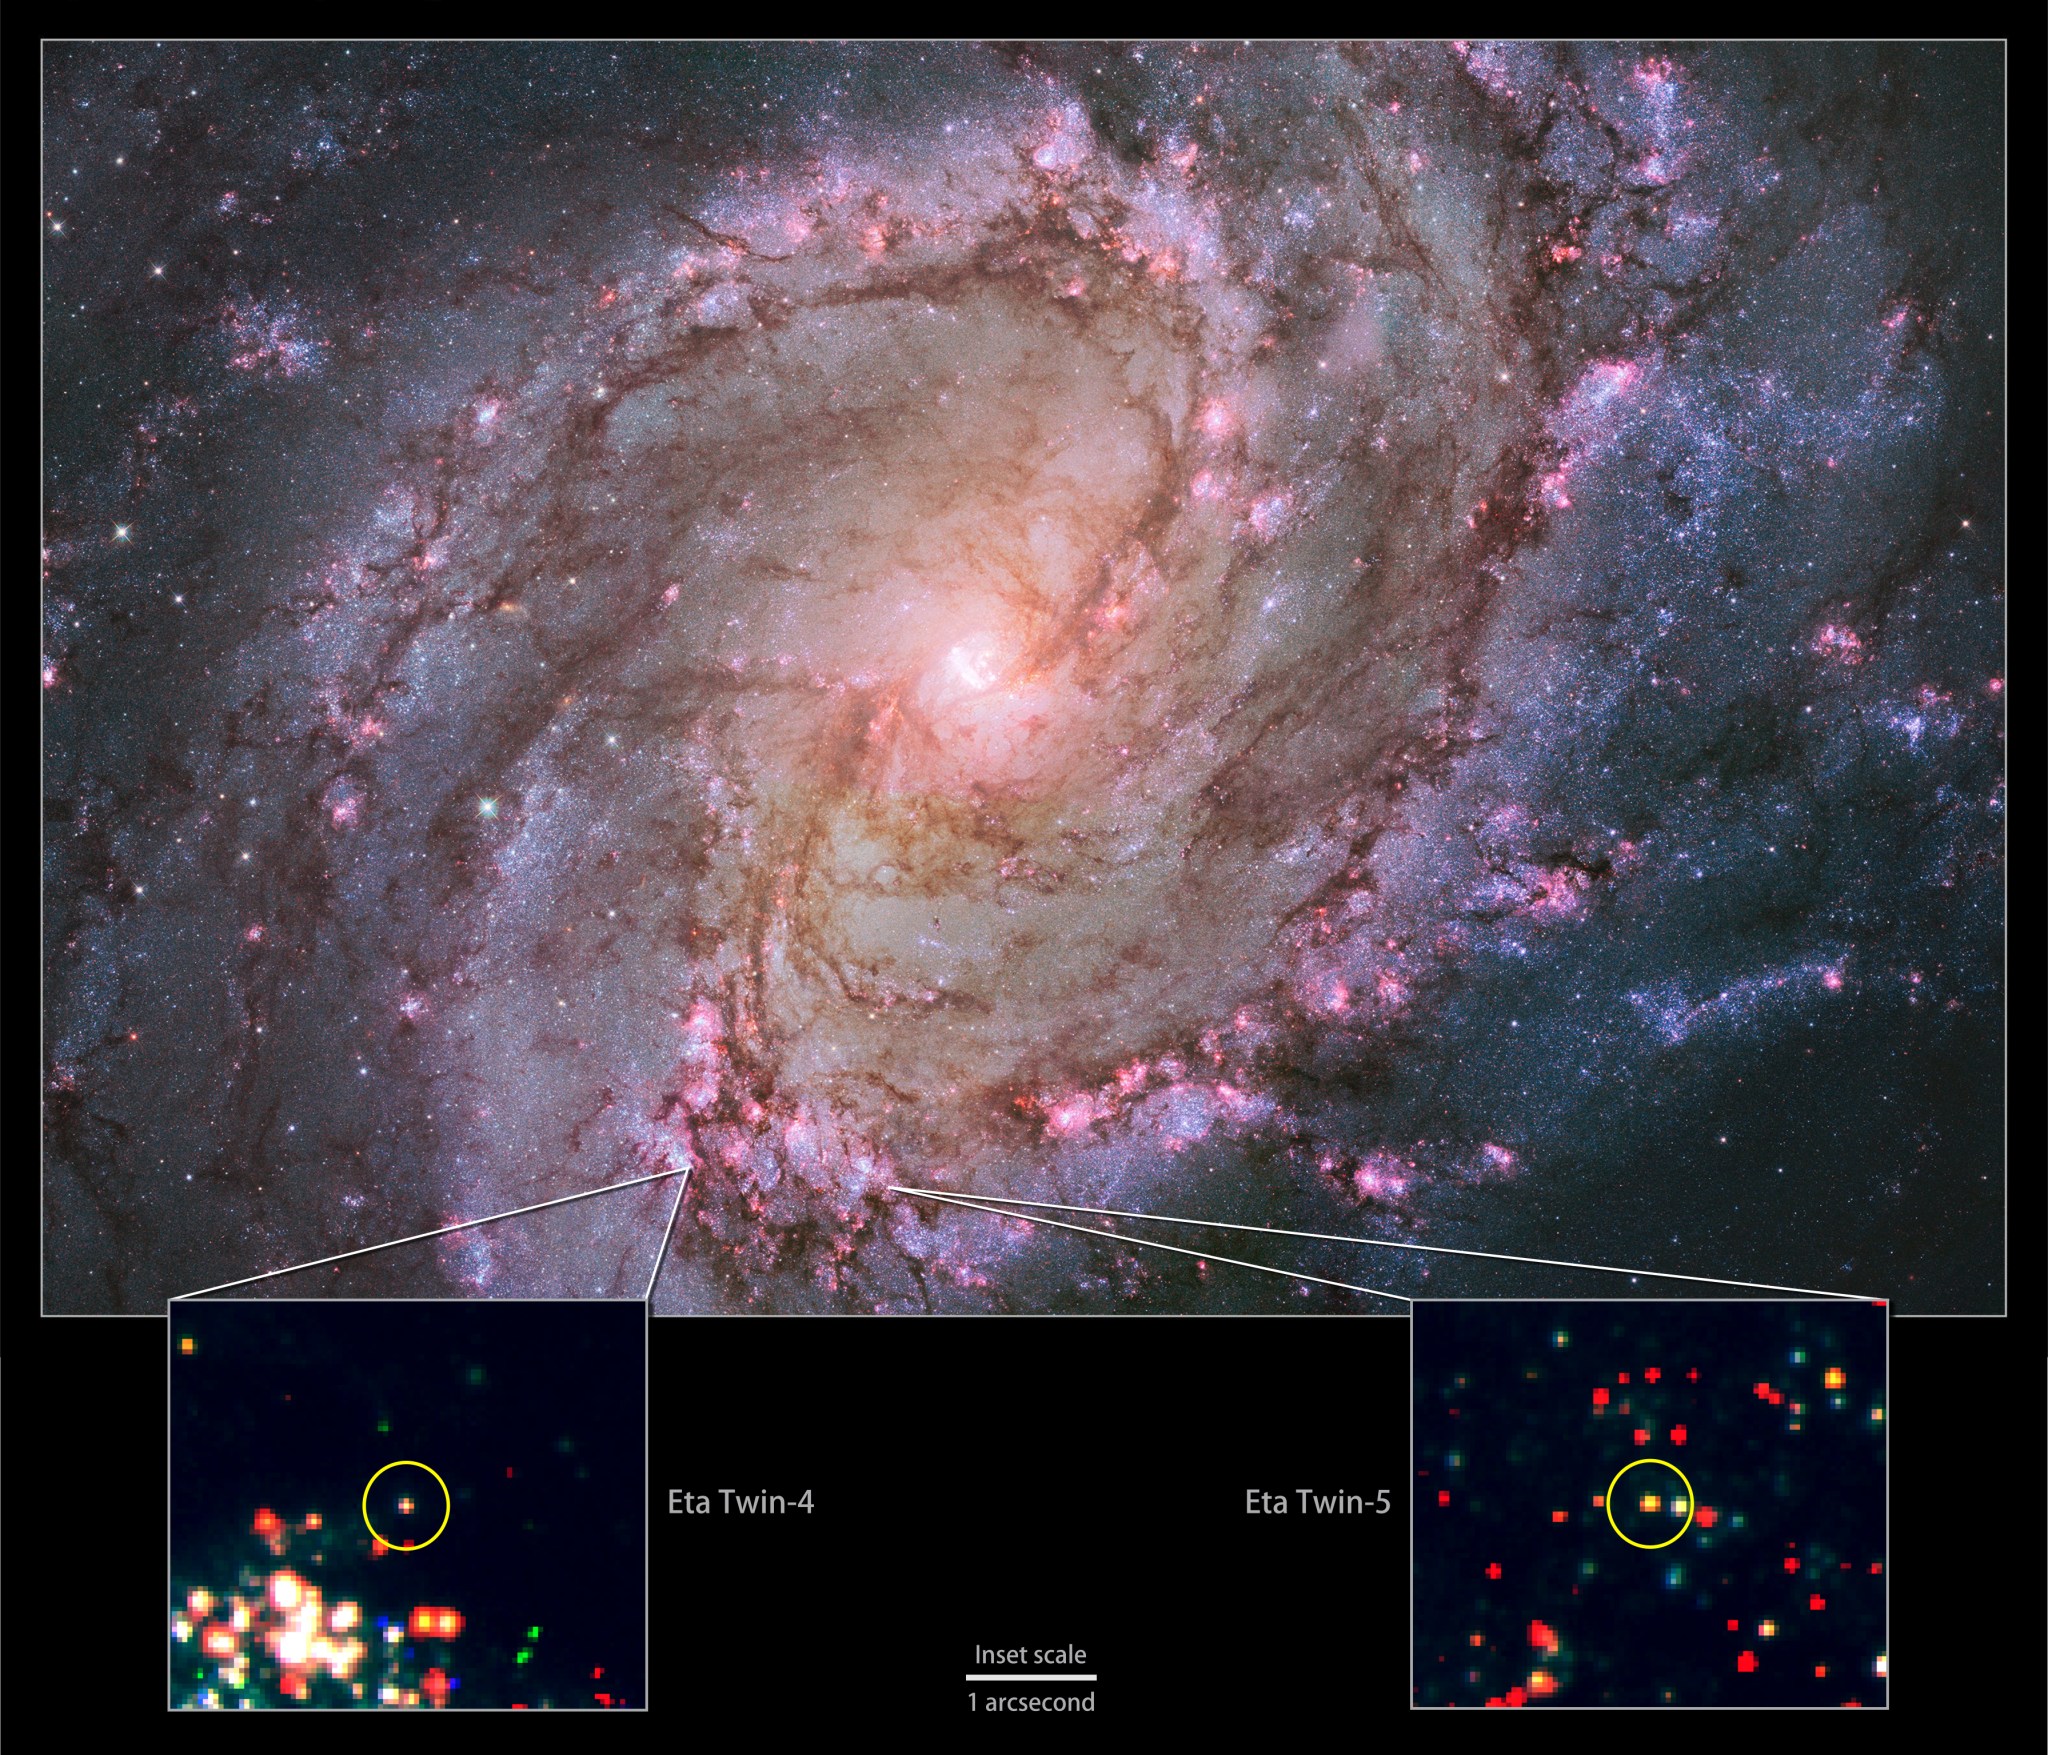 Composite of images from Hubble shows a galaxy ablaze with newly formed stars